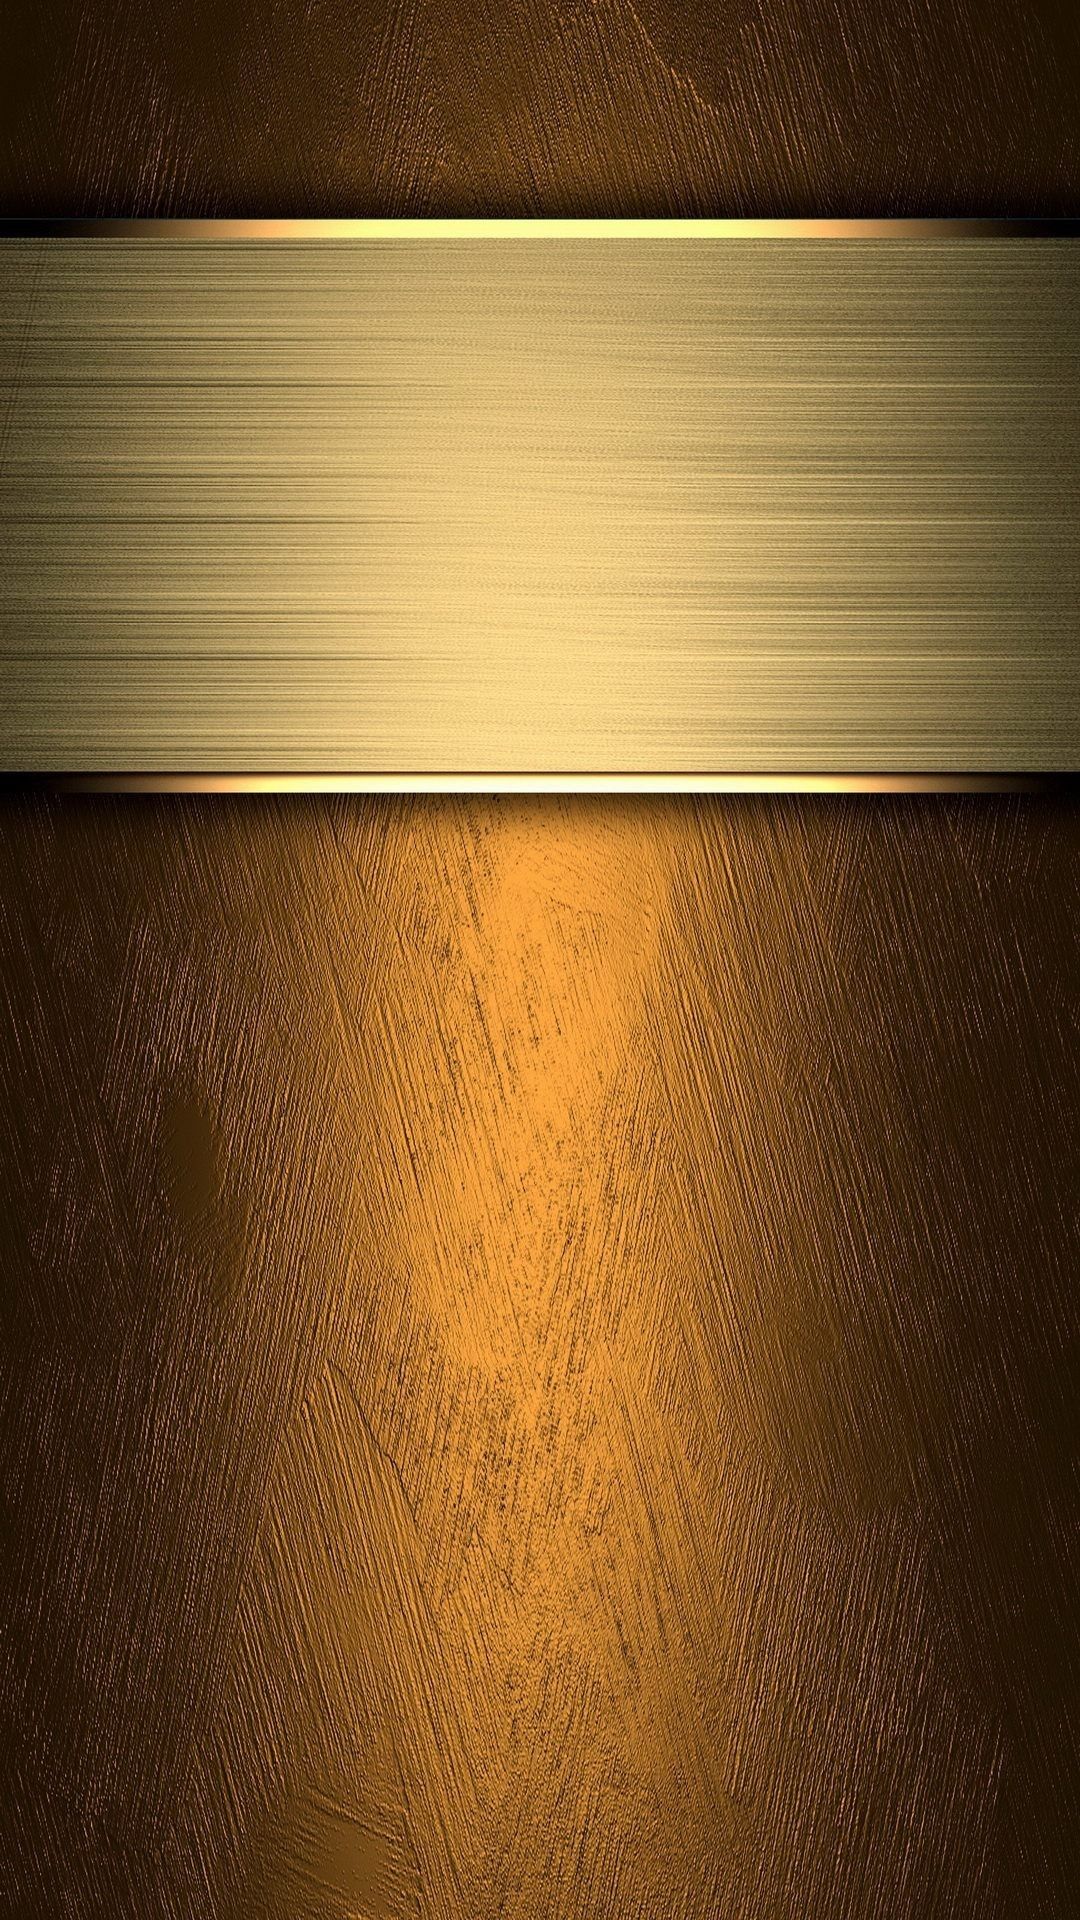 New iPhone Wallpaper. iPhone Wallpaper. Gold wallpaper phone, Gold wallpaper iphone, Gold wallpaper android